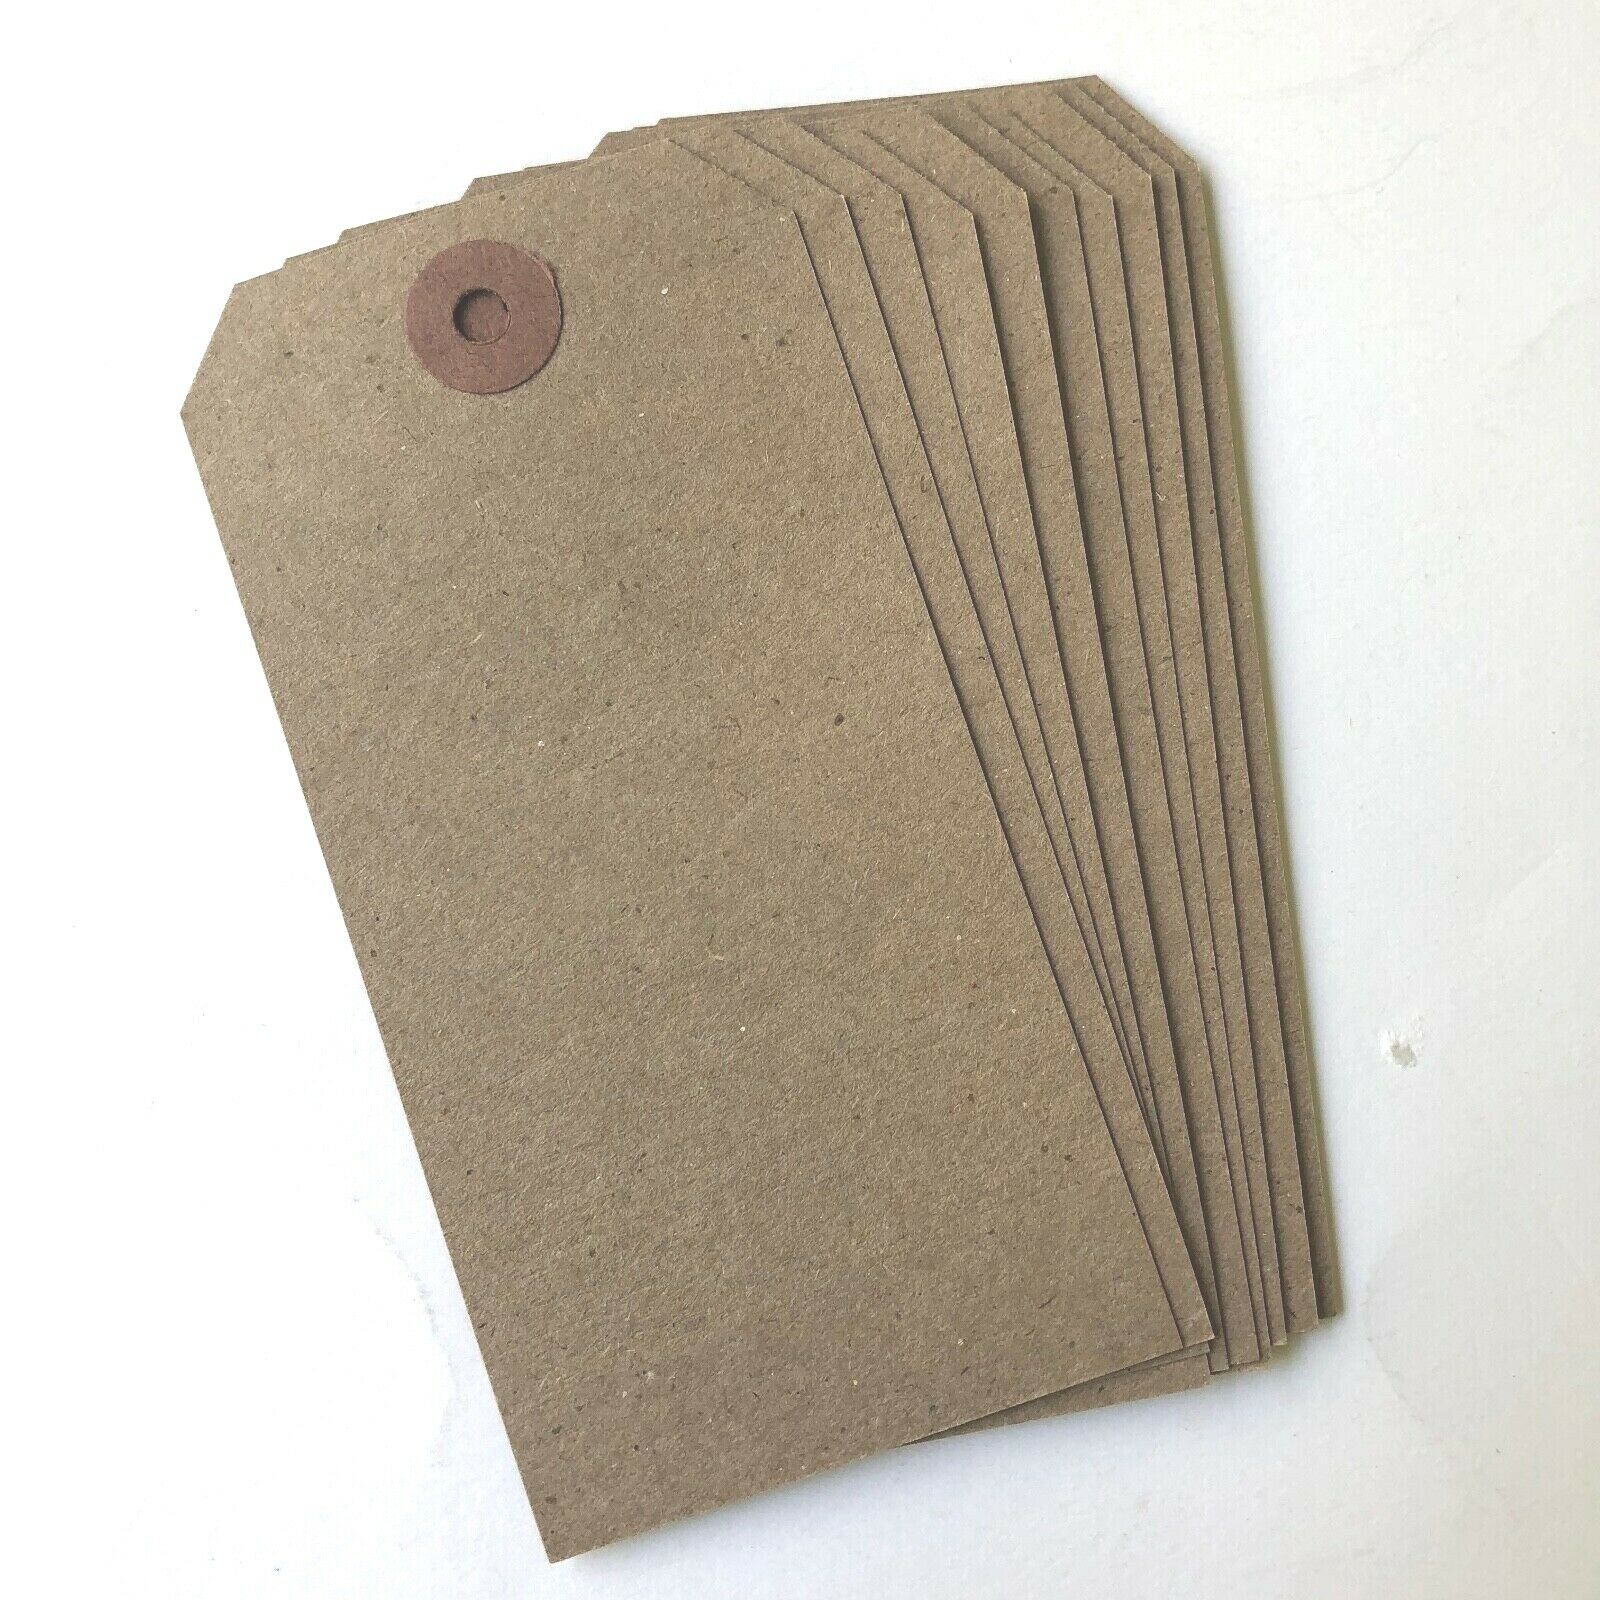 30 Kraft Brown Tags W/rust Color Hole Reinforcements  4 3/4” X 2 3/8”.